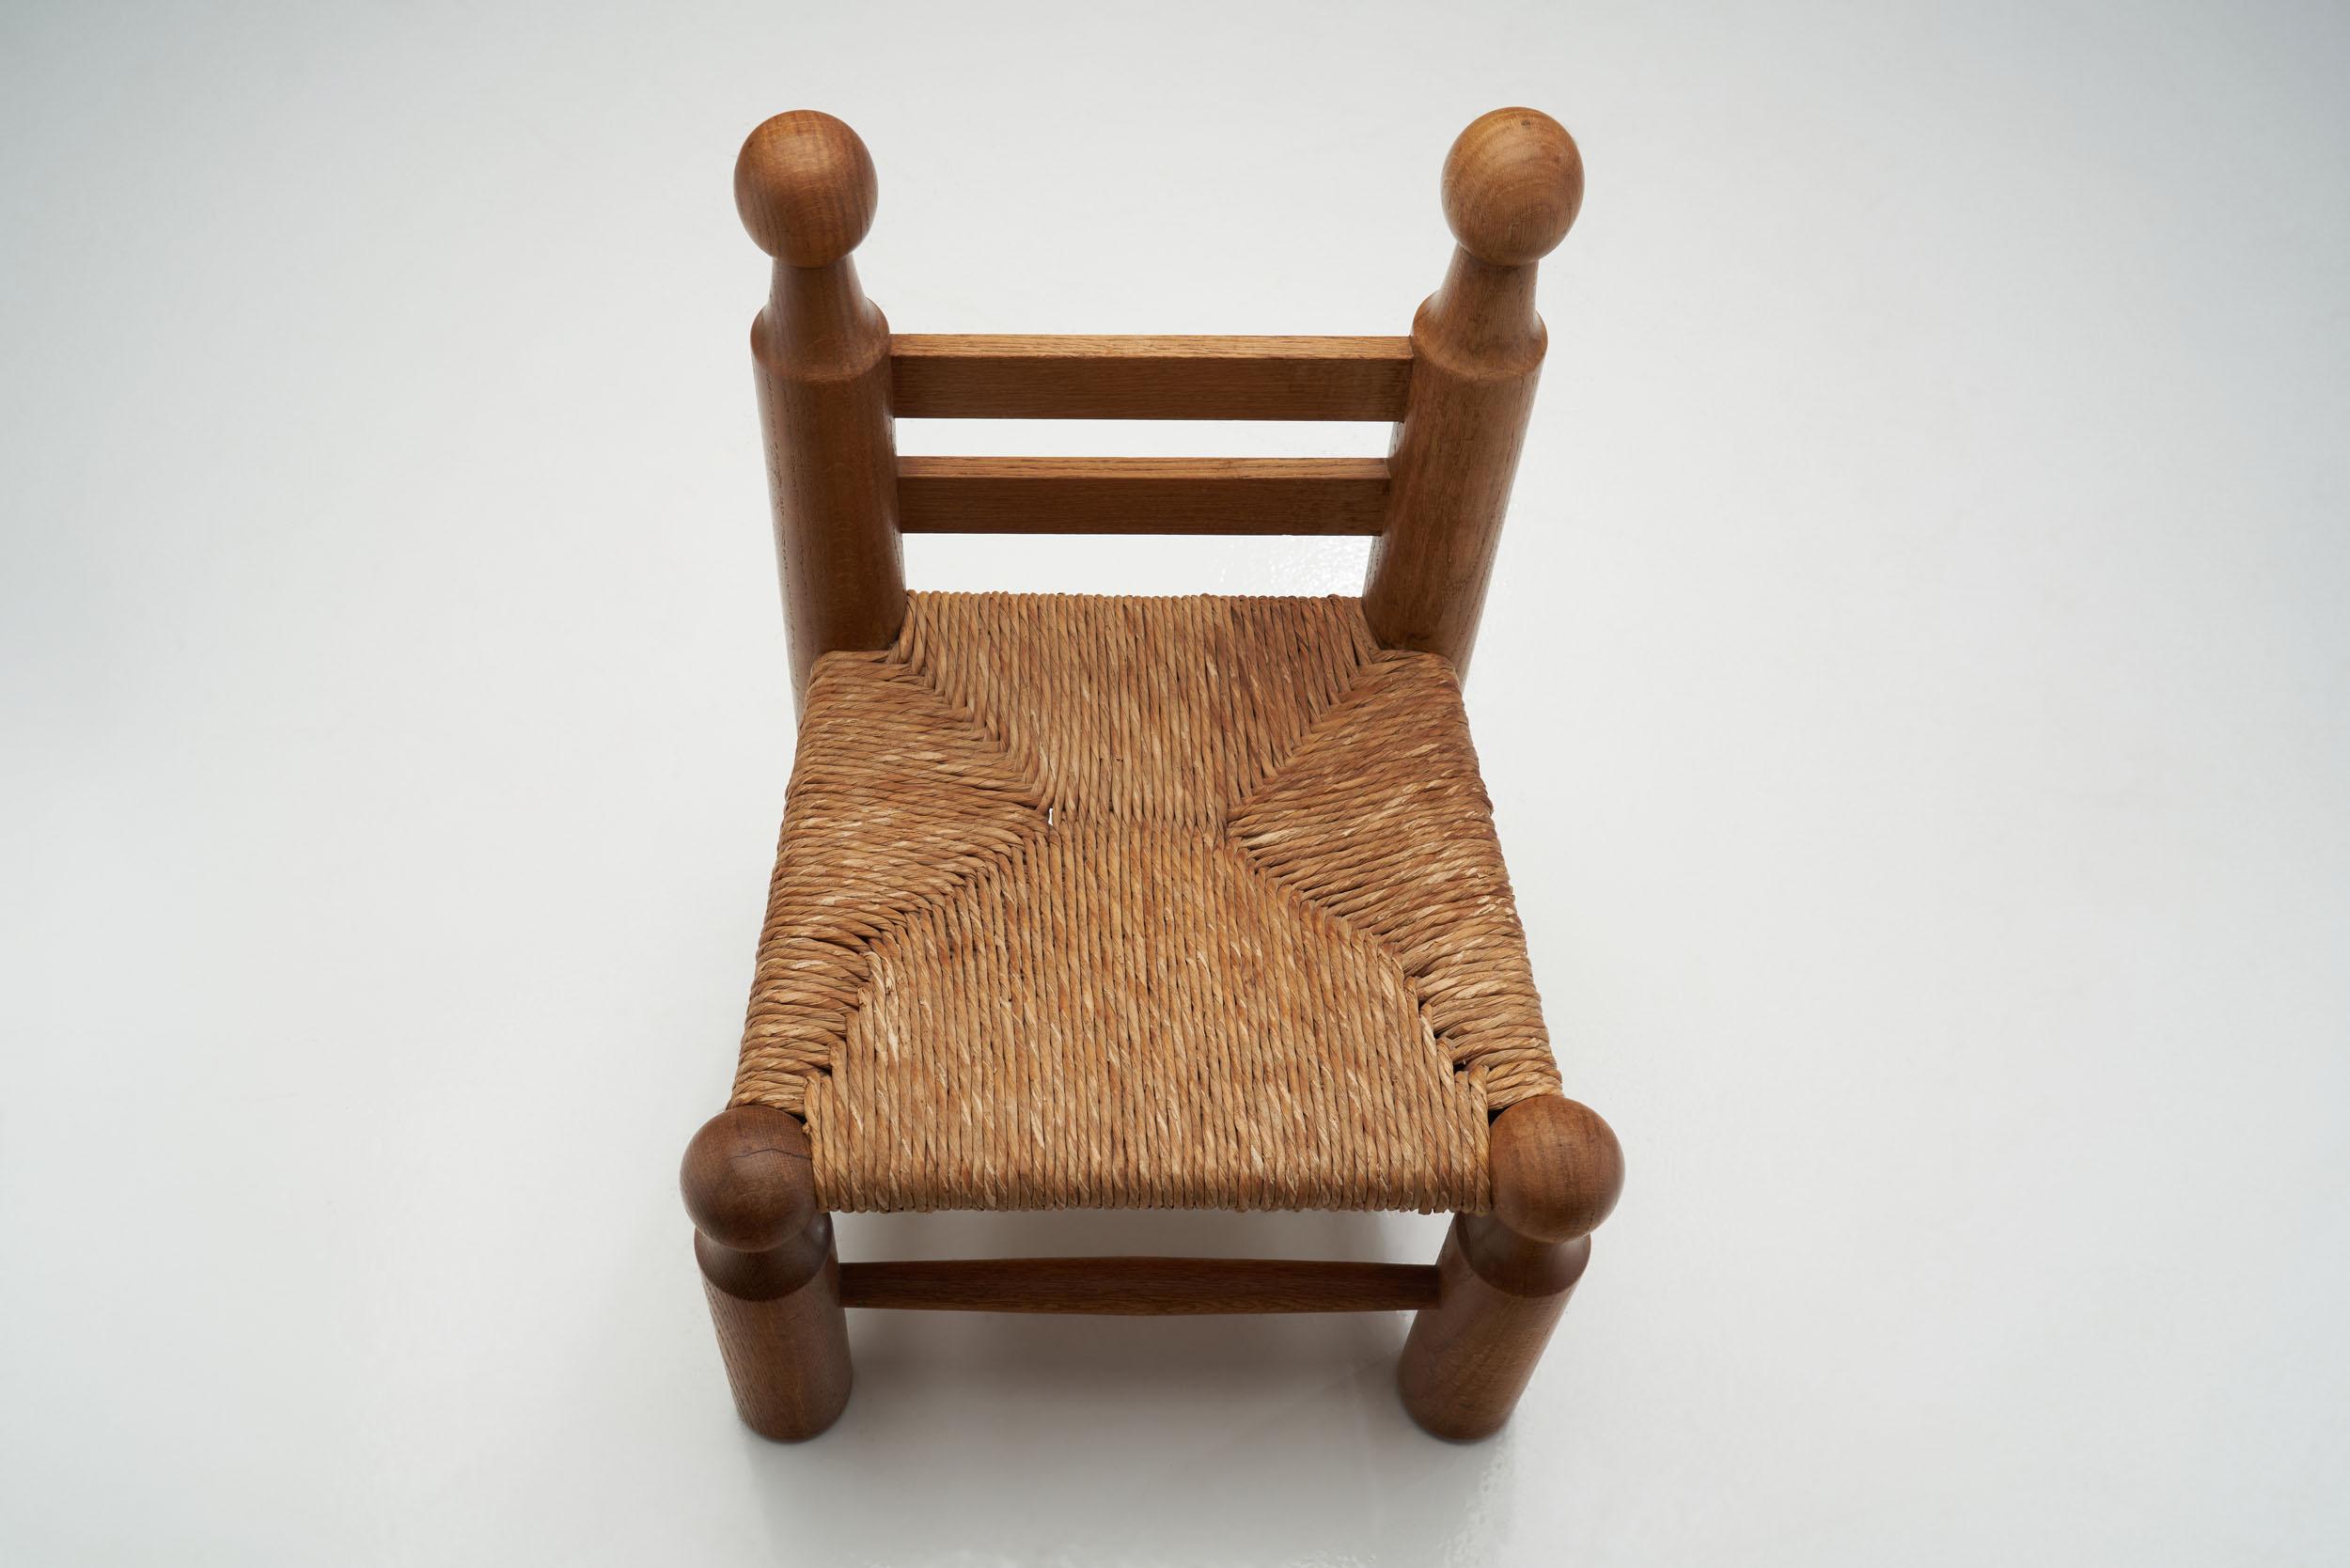 Small Wood and Wicker Chair by a European Cabinetmaker, Europe, Ca 1950s For Sale 13